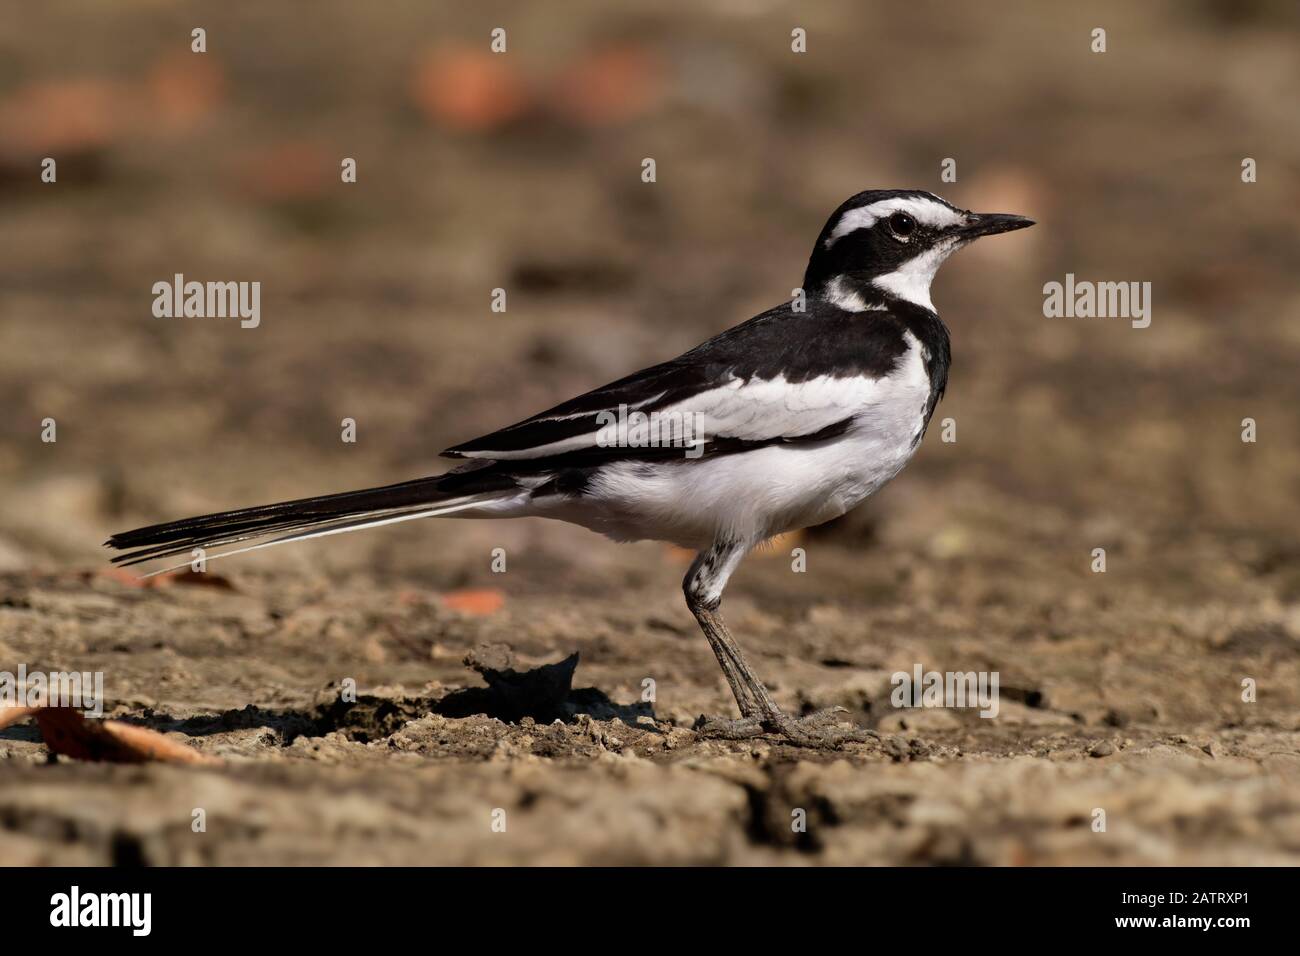 African Pied Wagtail - Motacilla aguimp species of bird in the family Motacillidae, striking black and white wagtail with black upperparts, found in s Stock Photo